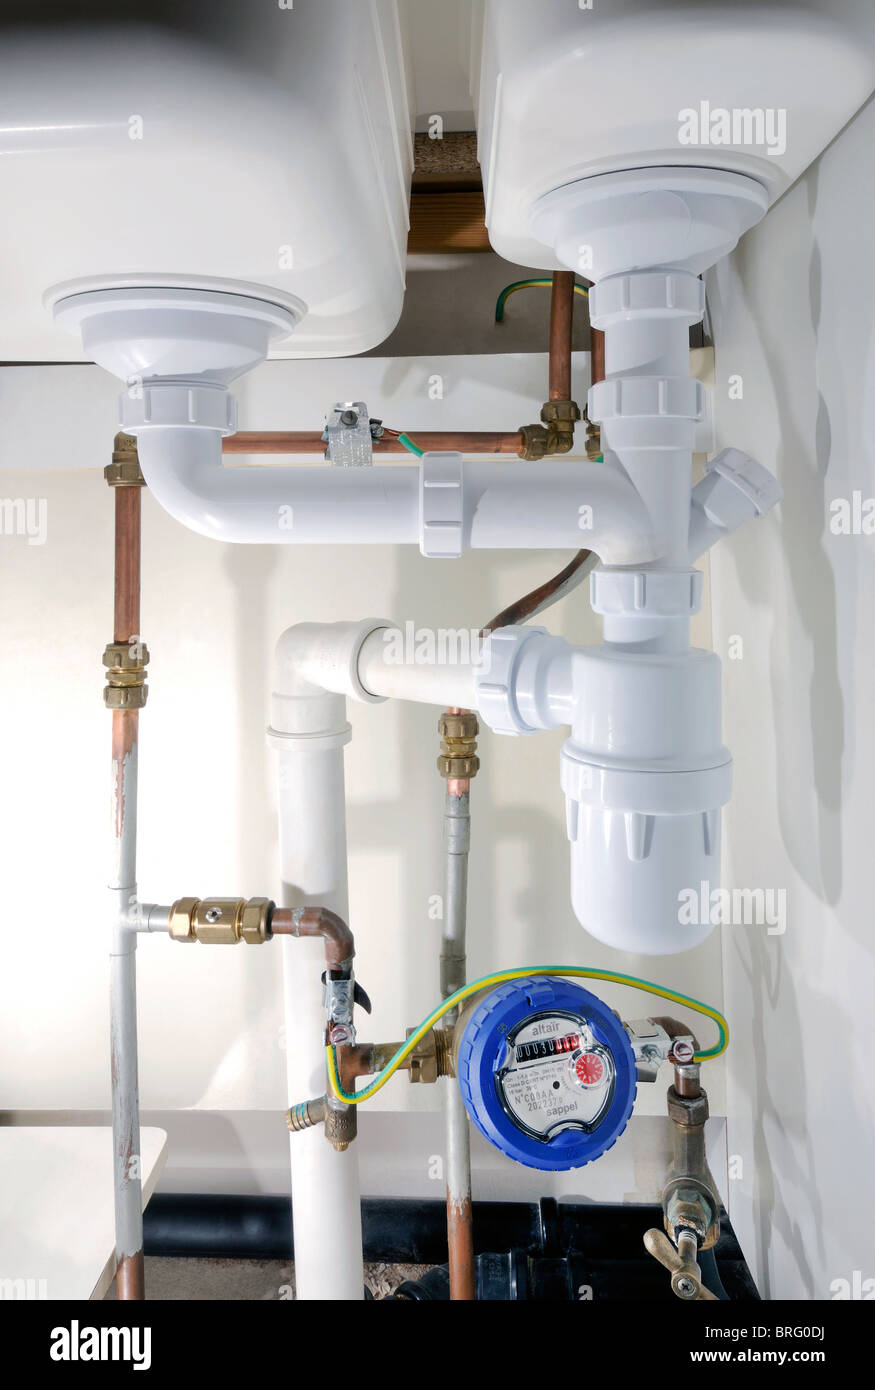 Undersink Piping With Water Meter Stock Photo 31699070 Alamy